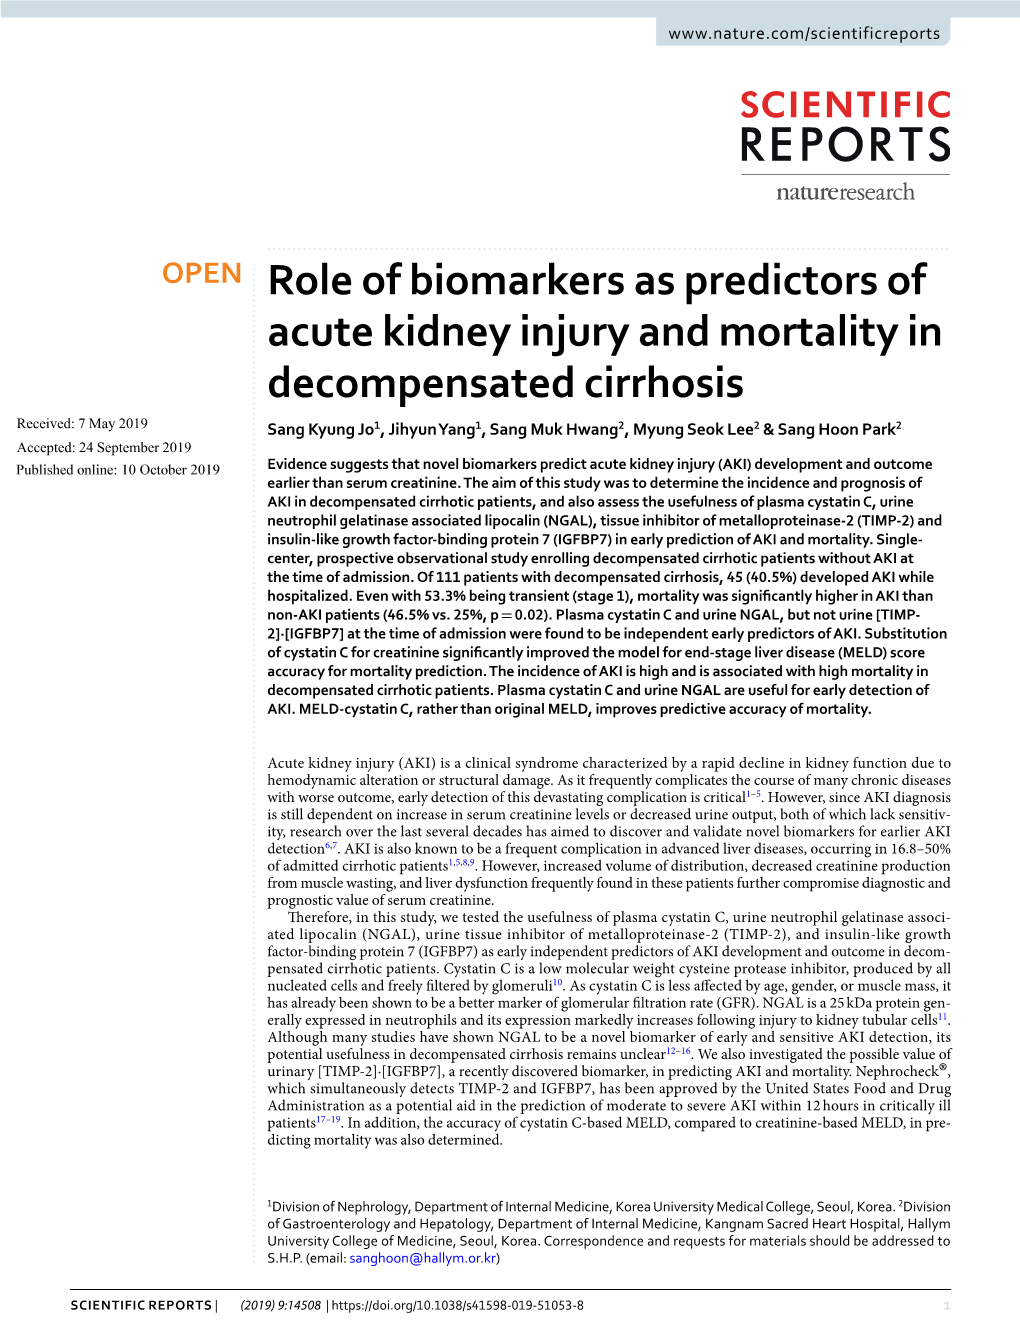 Role of Biomarkers As Predictors of Acute Kidney Injury and Mortality In